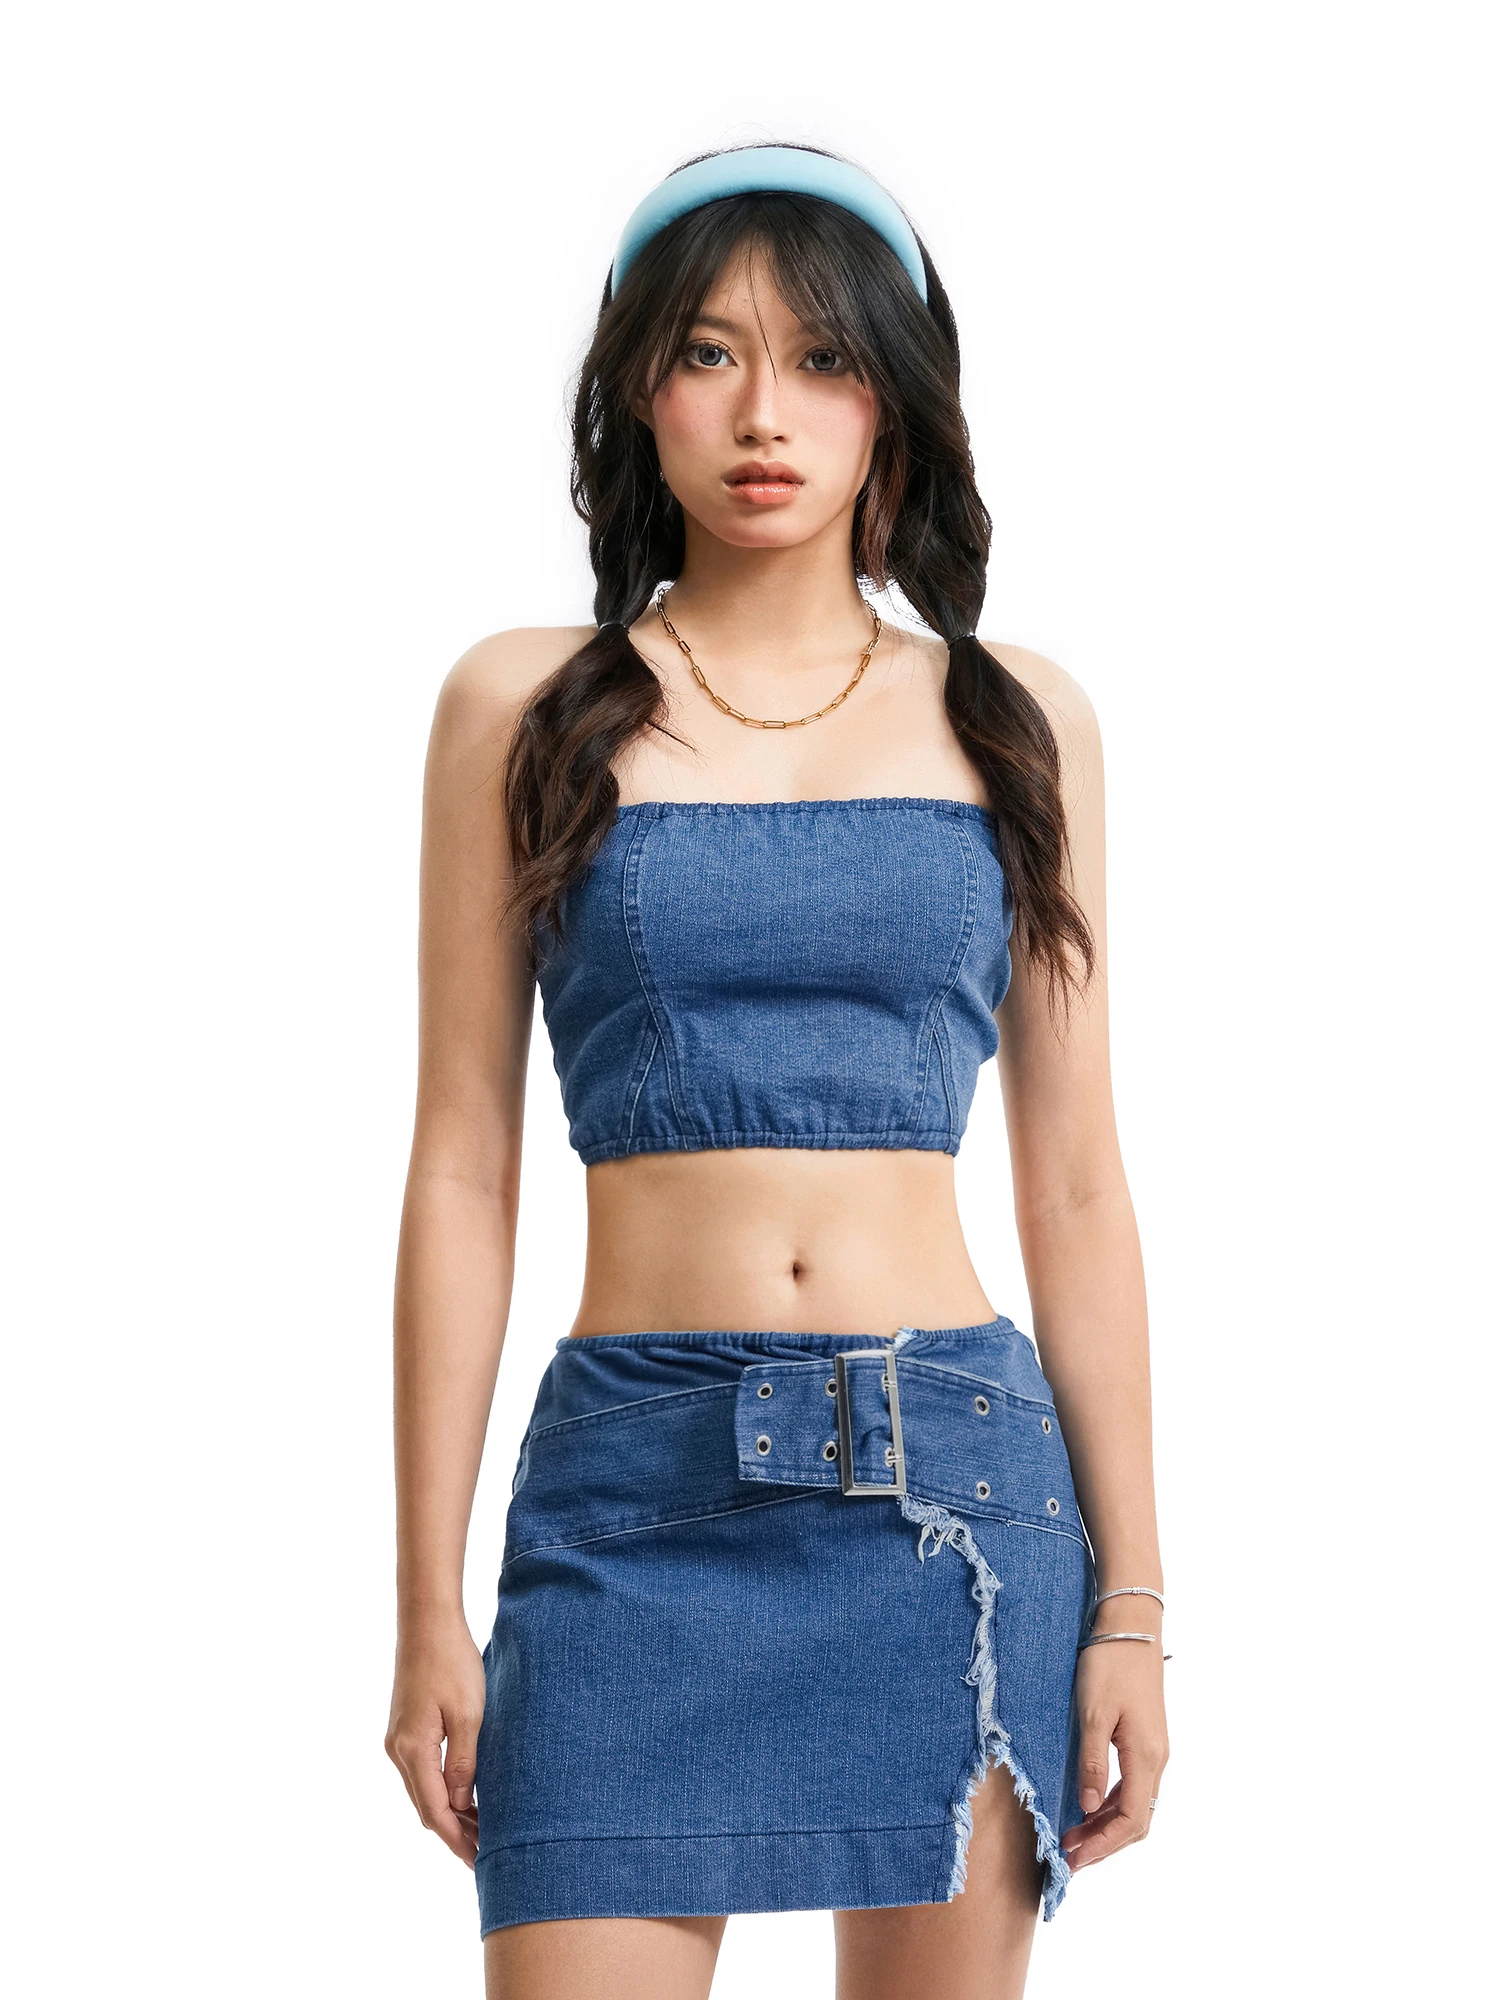 

Nituyy Skirt Sets Women 2 Piece Outfits Sexy Strapless Sleeveless Crop Tube Tops and Mini Skirt Y2K Party Beach Streetwear J